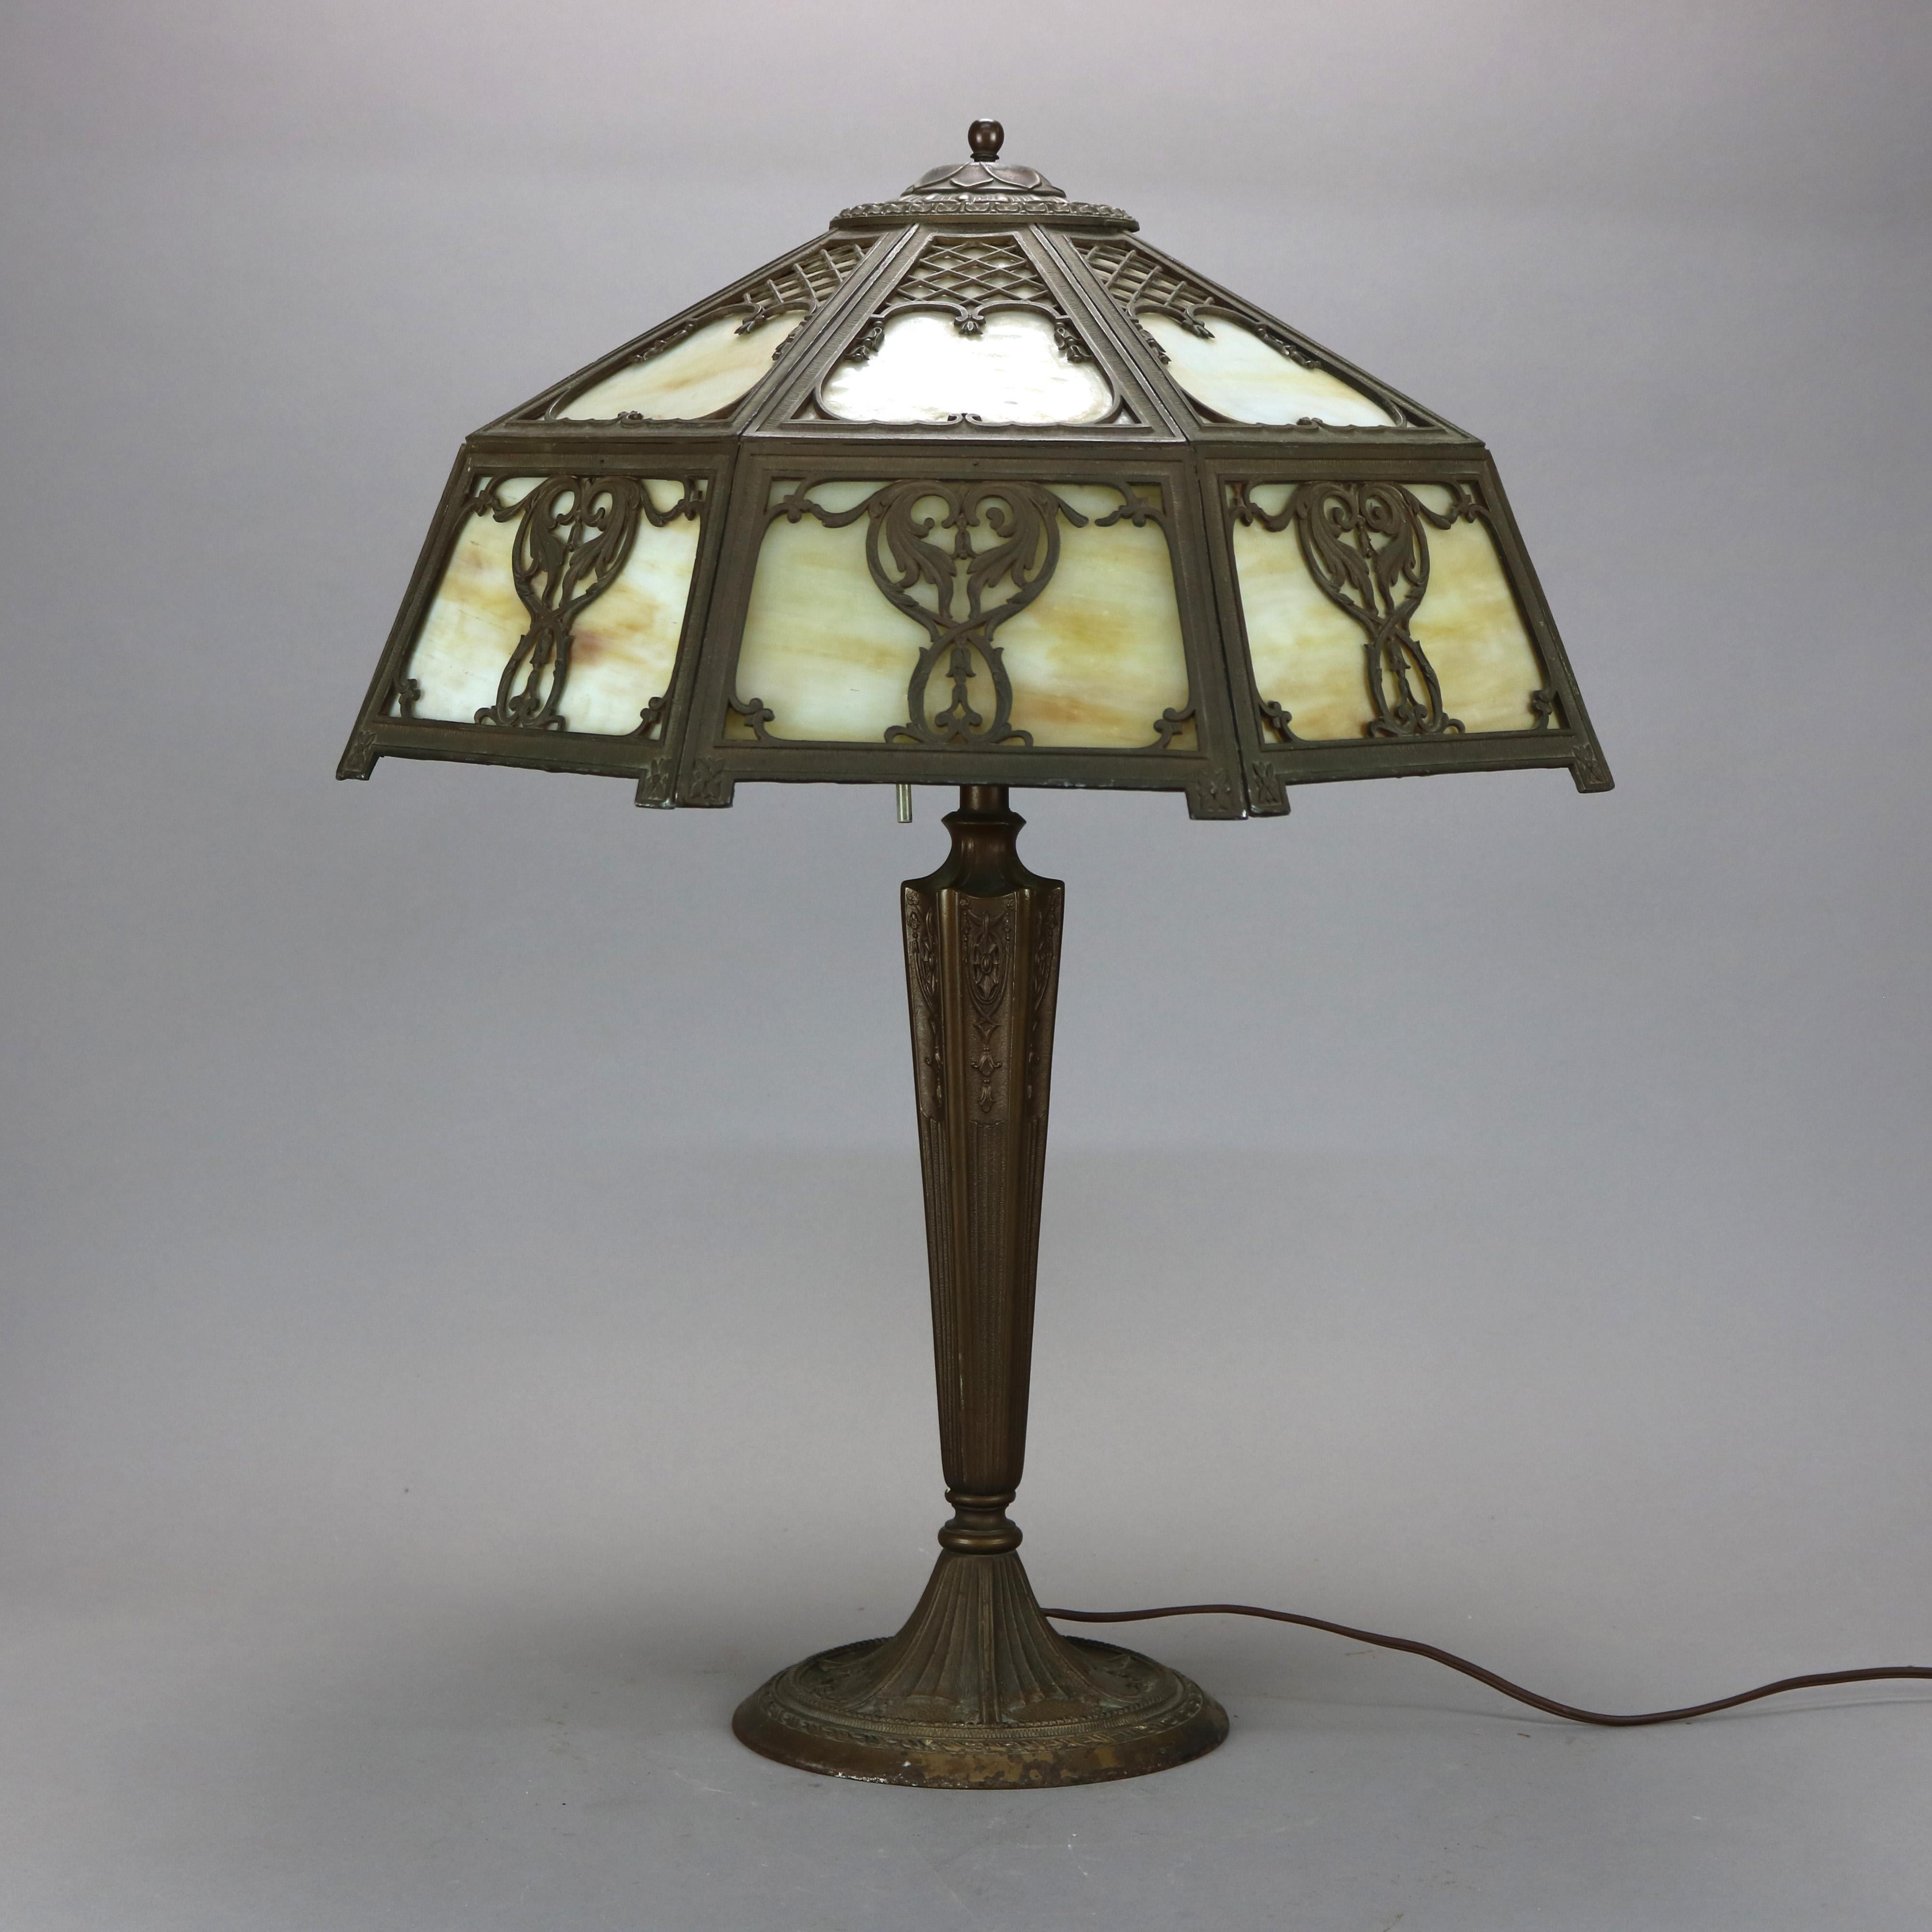 An antique Arts & Crafts table lamp in the manner by Miller Lamp Co offers scroll, foliate and lattice filigree shade housing slag glass panels over double socket cast base, embossed maker mark on base as photographed, c1920

Measures - 25'' H x